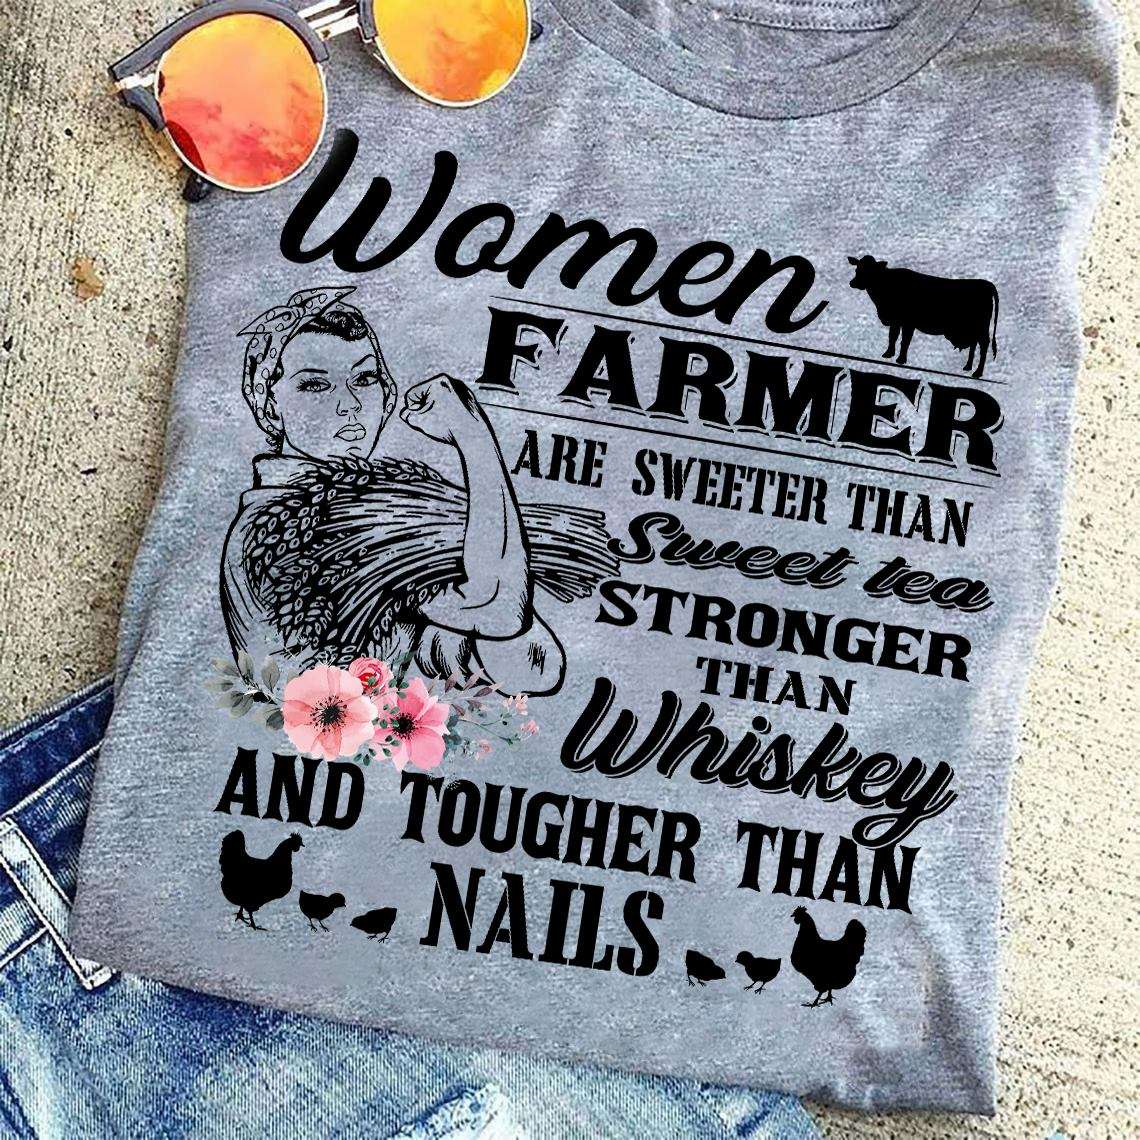 Woman Farmer, Strong Woman - Women Farmer are sweeter than sweet tea tronger than whiskey and tougher than nails